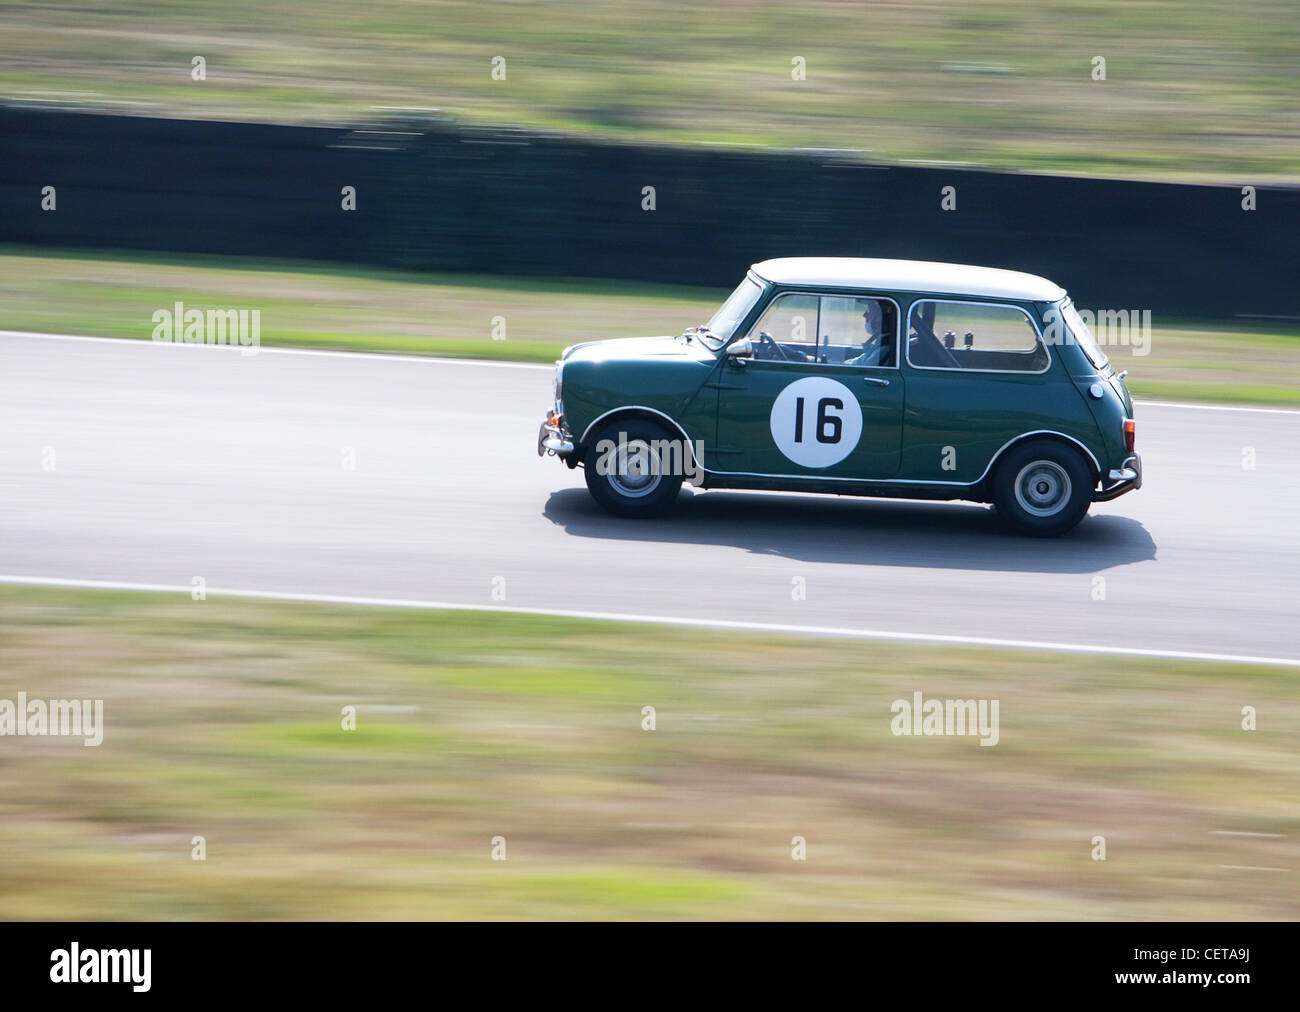 Green Mini Cooper on race track at Goodwood Revival. Stock Photo